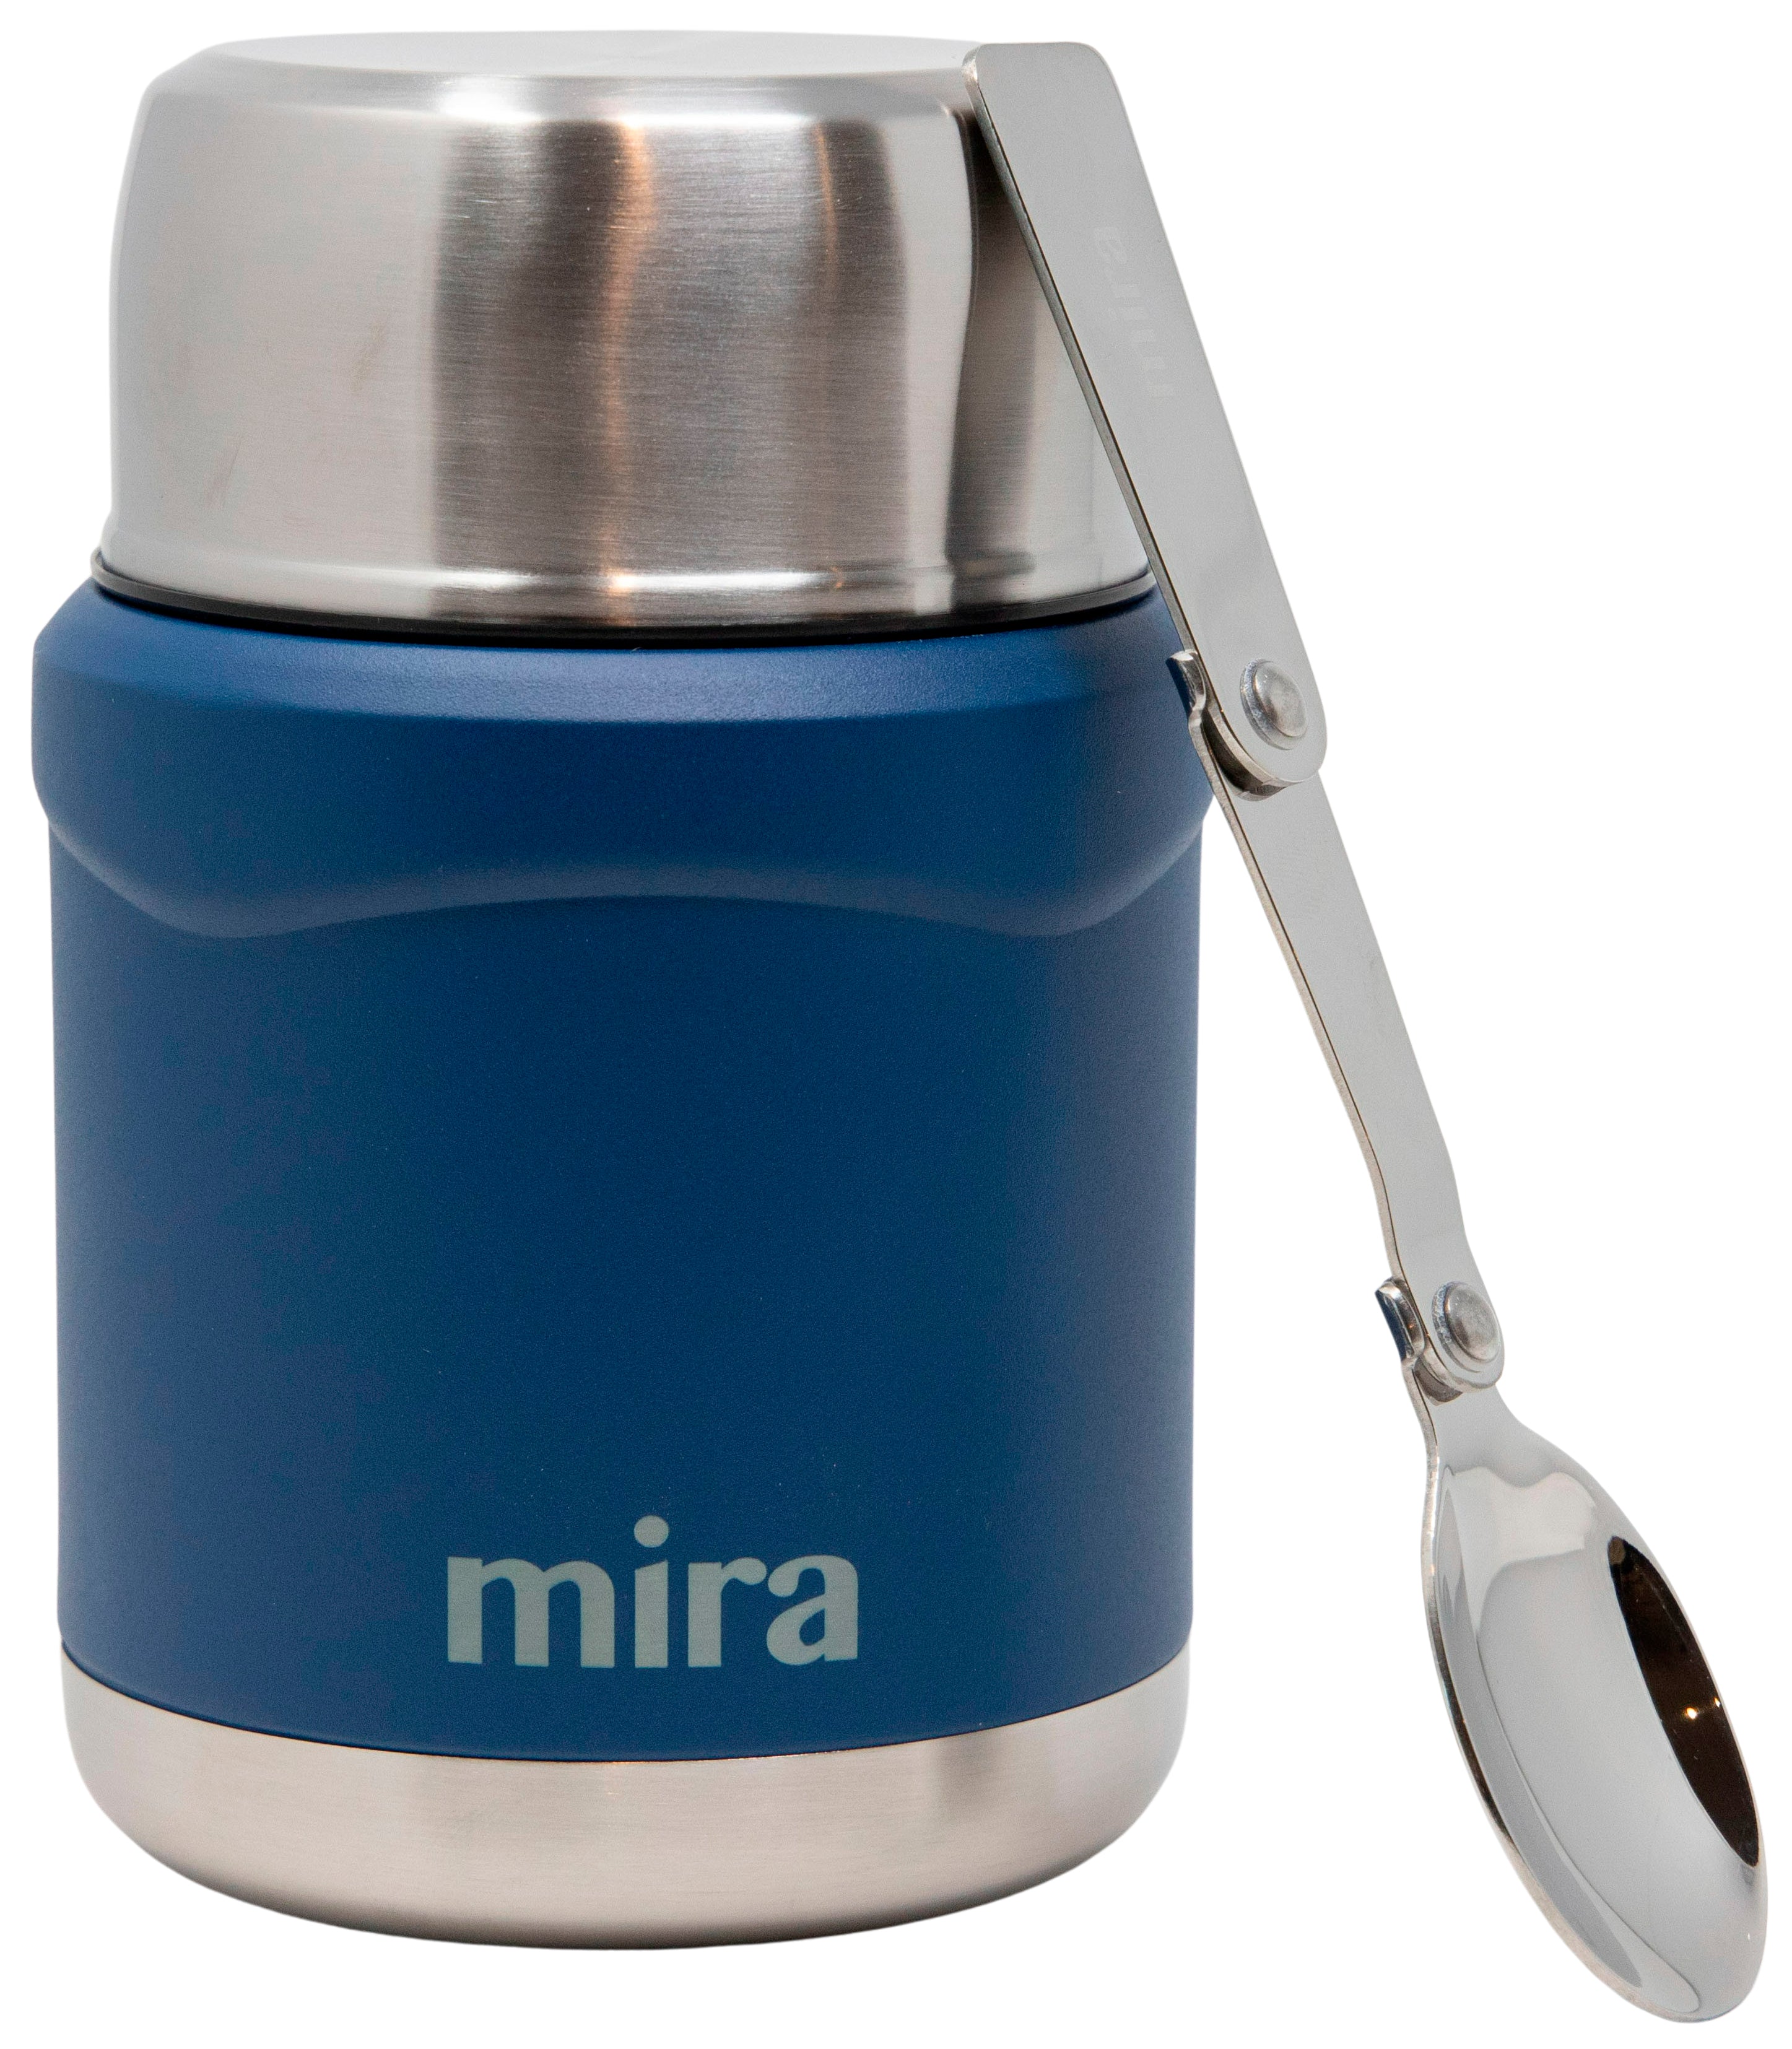 MIRA 9 oz Lunch, Food Jar - Vacuum Insulated Stainless Steel